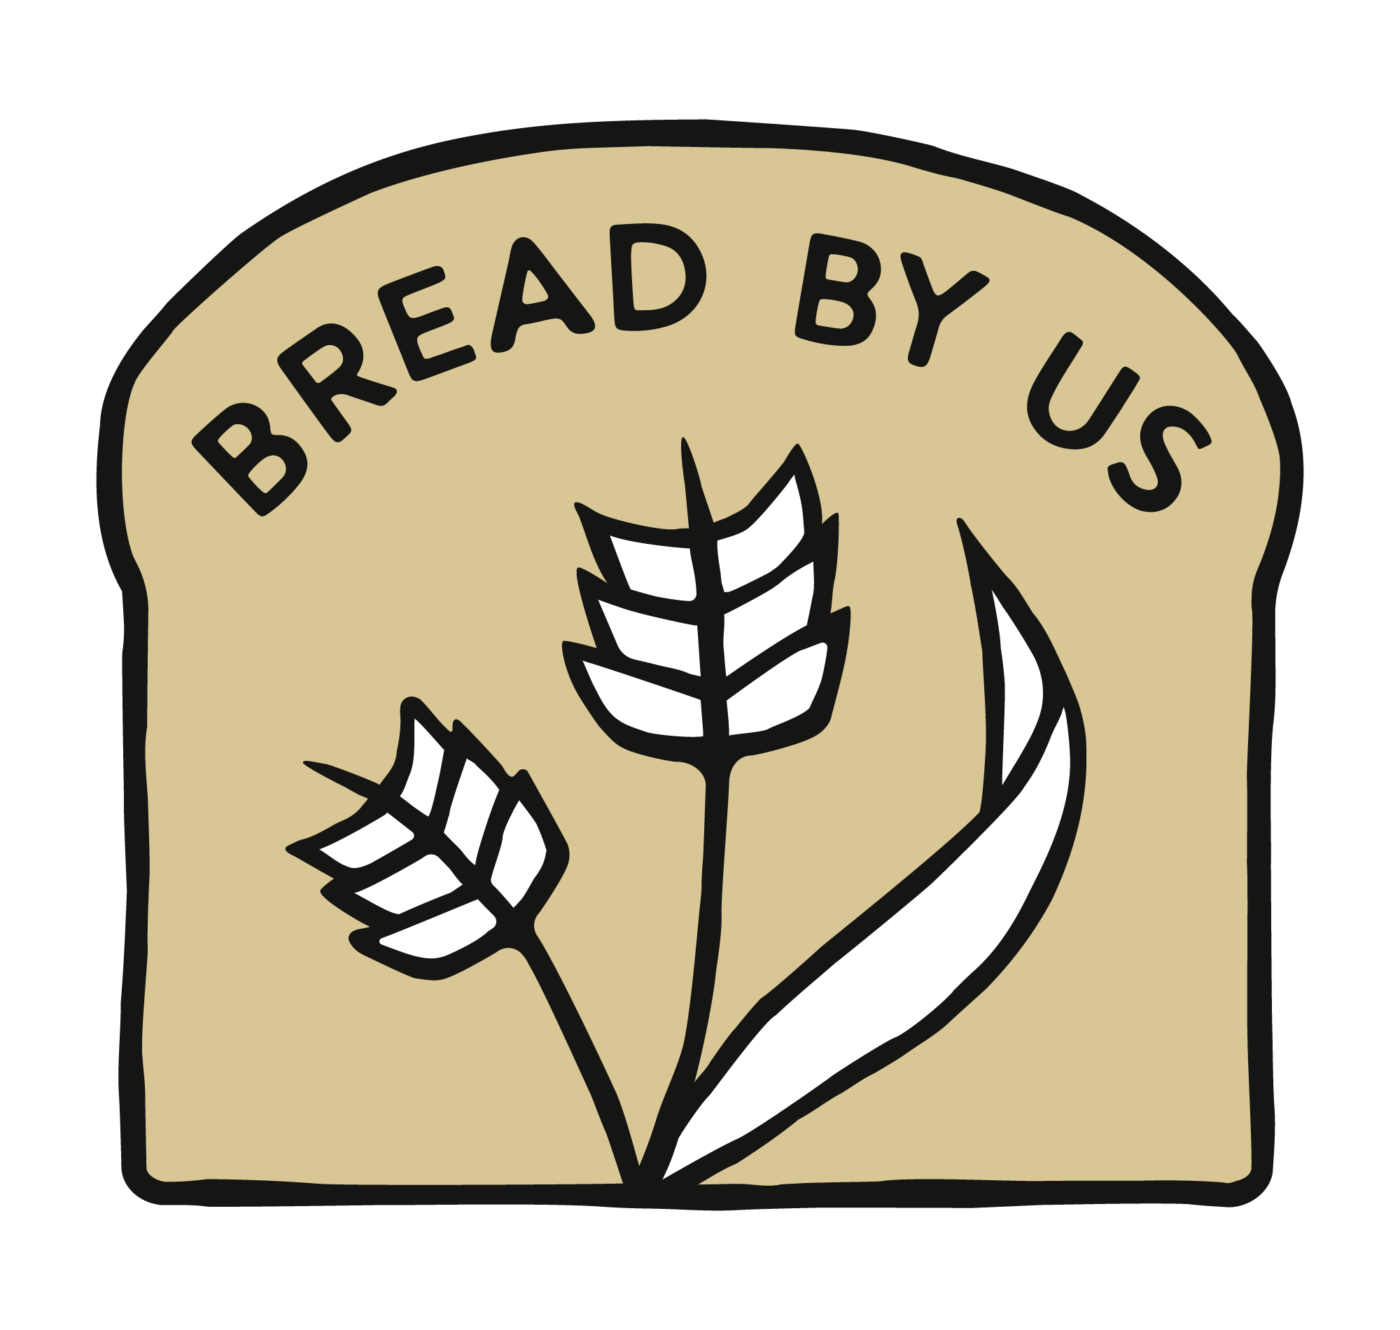 Bread By Us